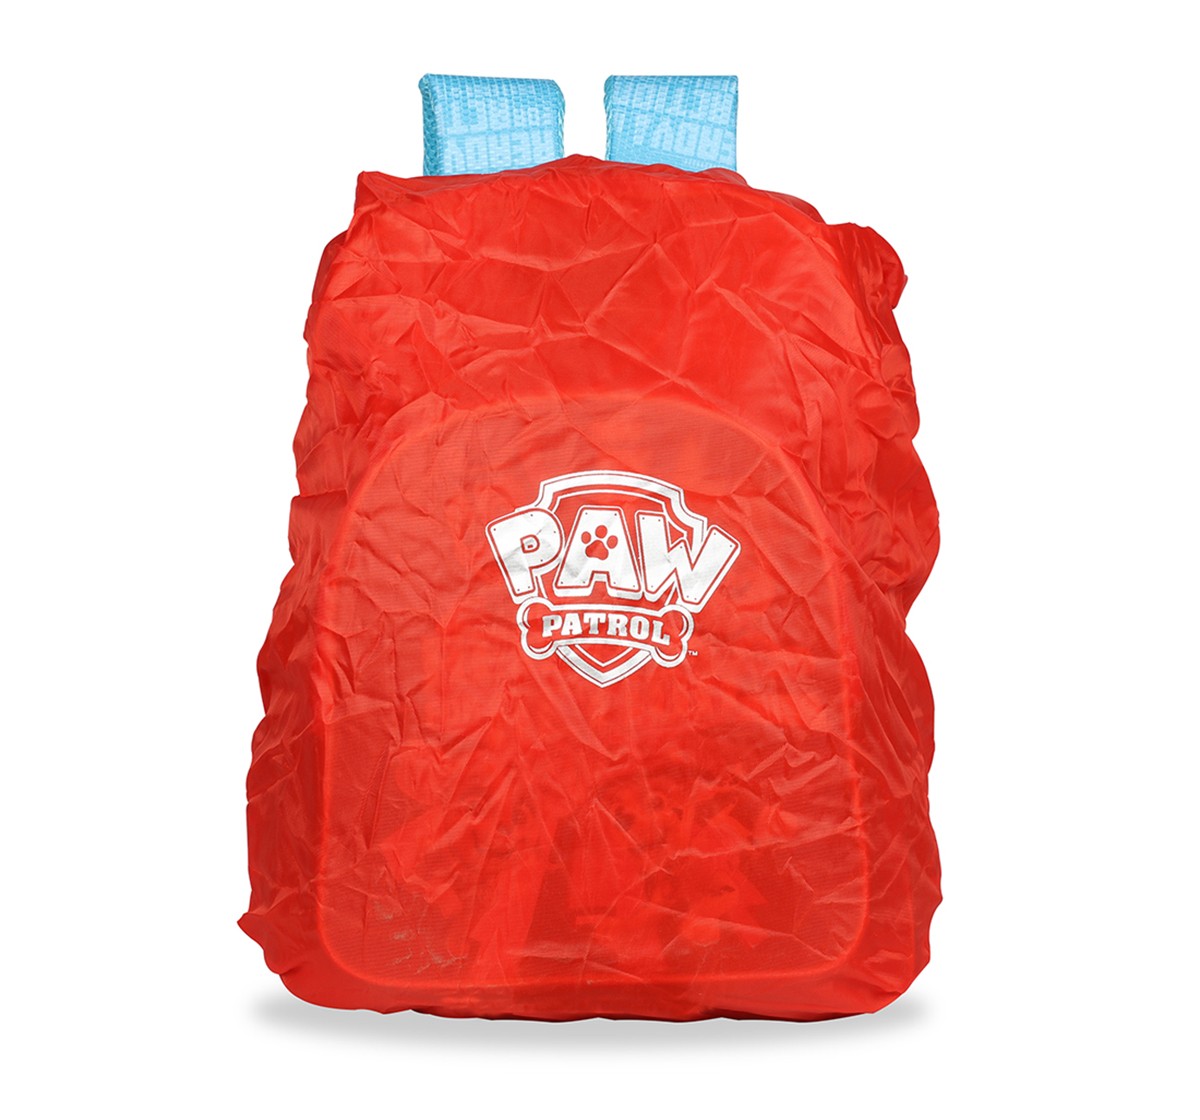 Paw Patrol Paw Patrol Ready For Action Red & Blue School Bag 36 Cm  Bags for Kids age 3Y+ 